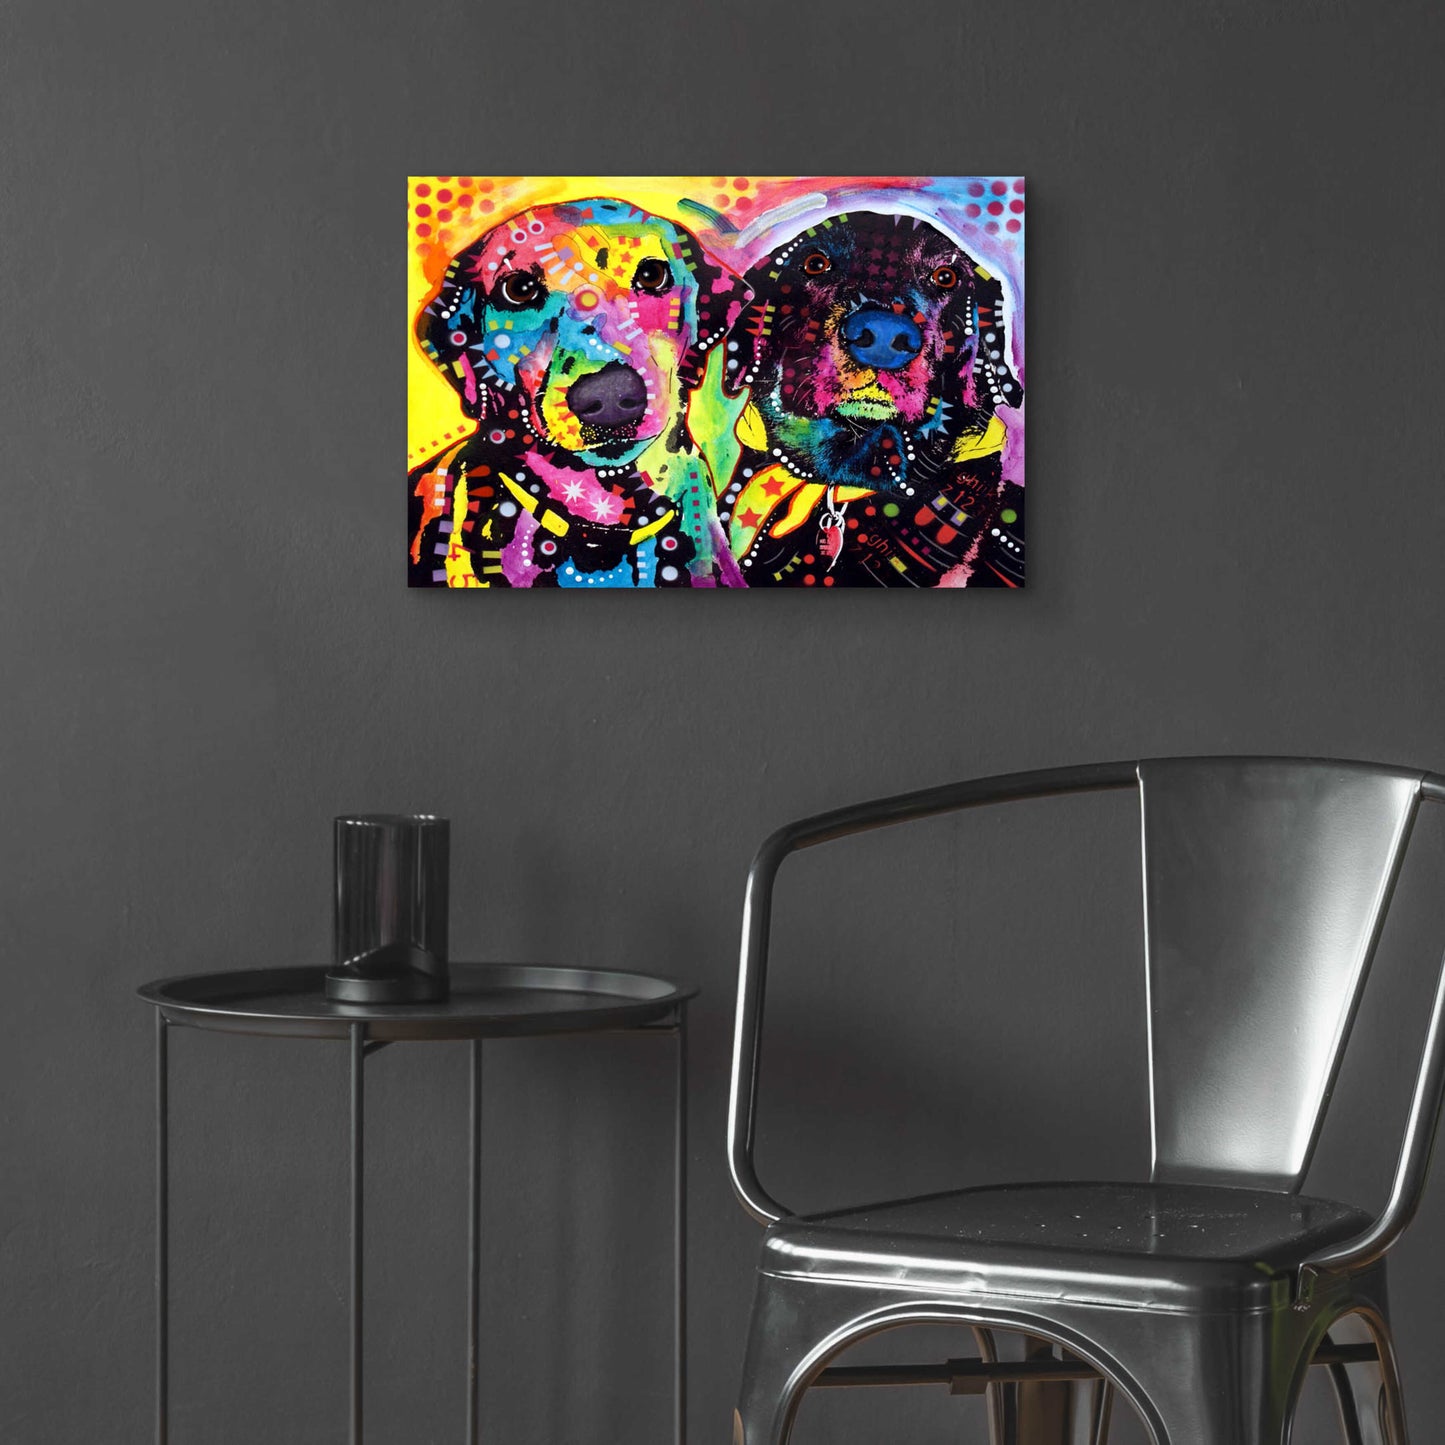 Epic Art 'Daisy and Noel' by Dean Russo, Acrylic Glass Wall Art,24x16